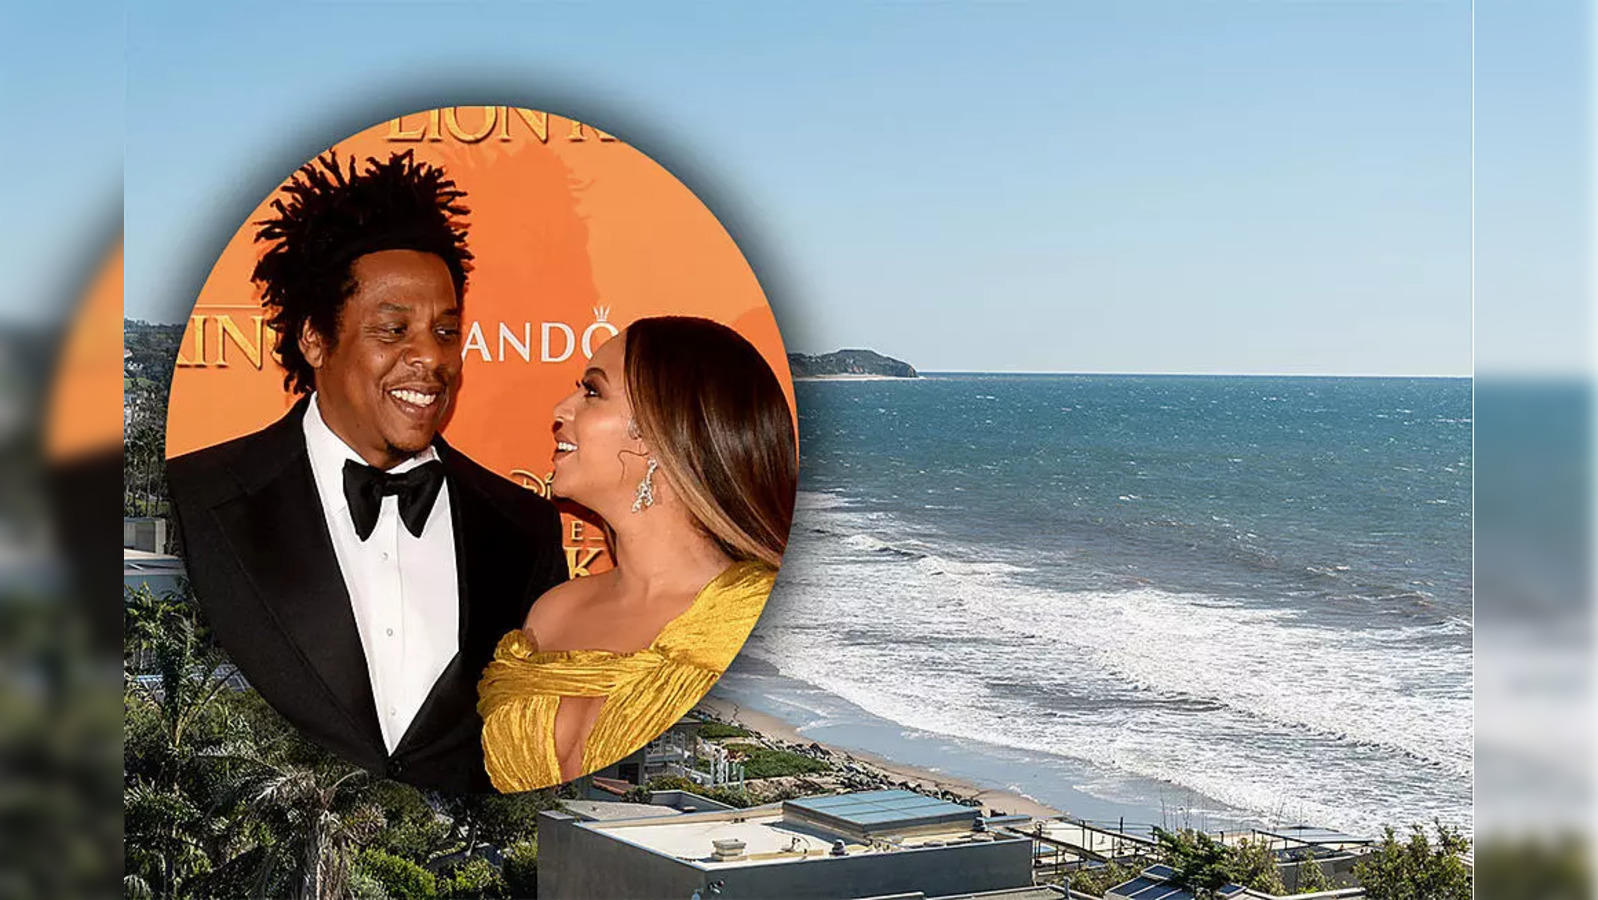 Jay-Z and Beyonce buy California's most expensive home for $200 million